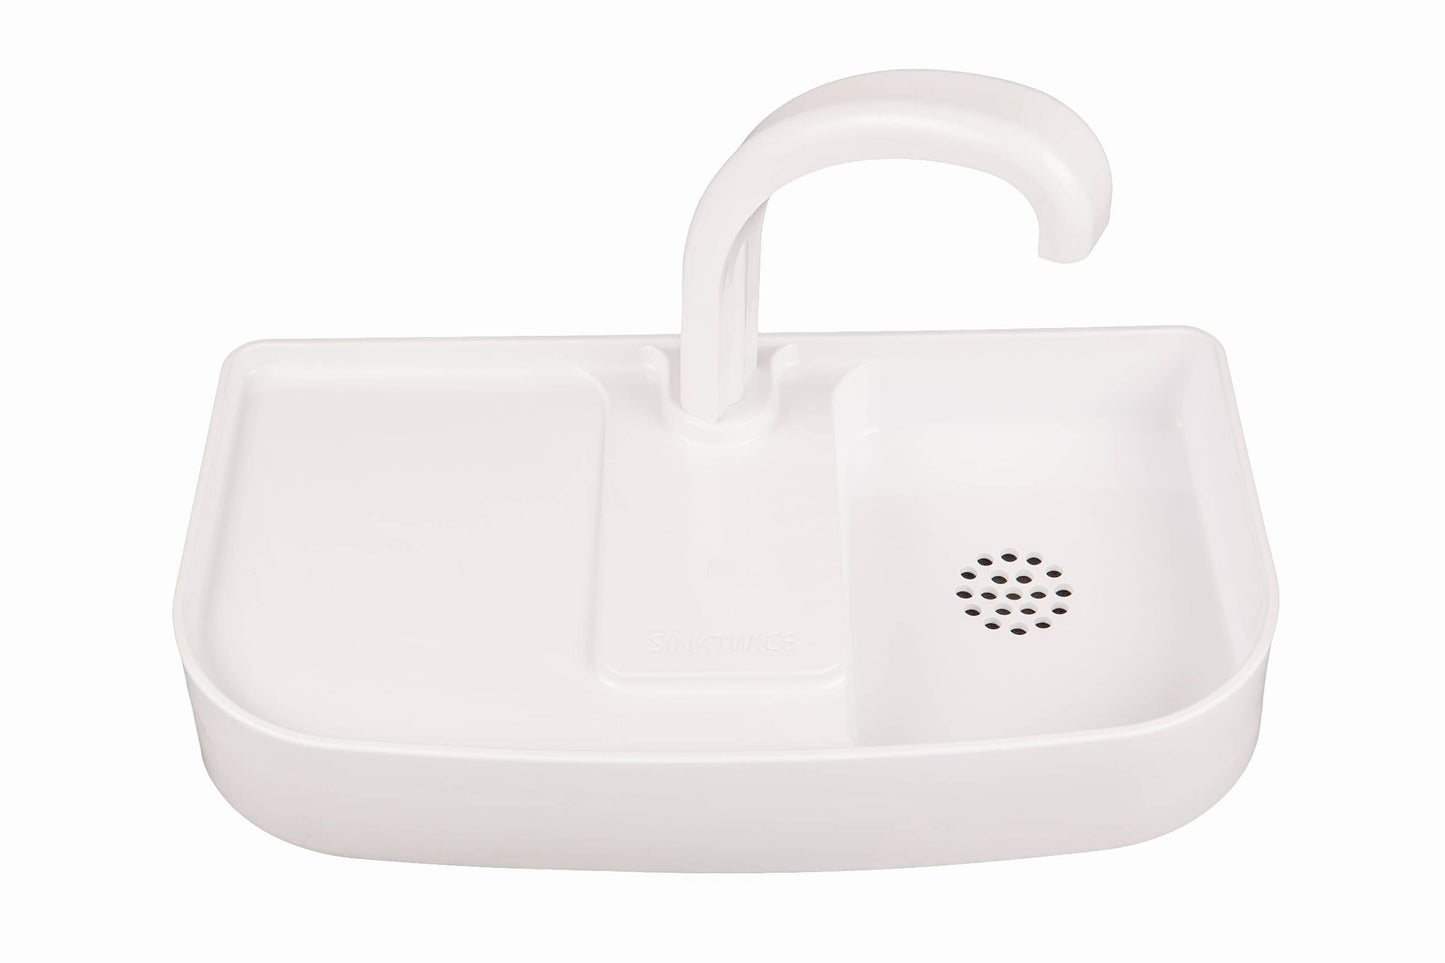 Blemished Sink Smaller toilet sink for tanks 15.25" or smaller measured with lid off (by SinkTwice)